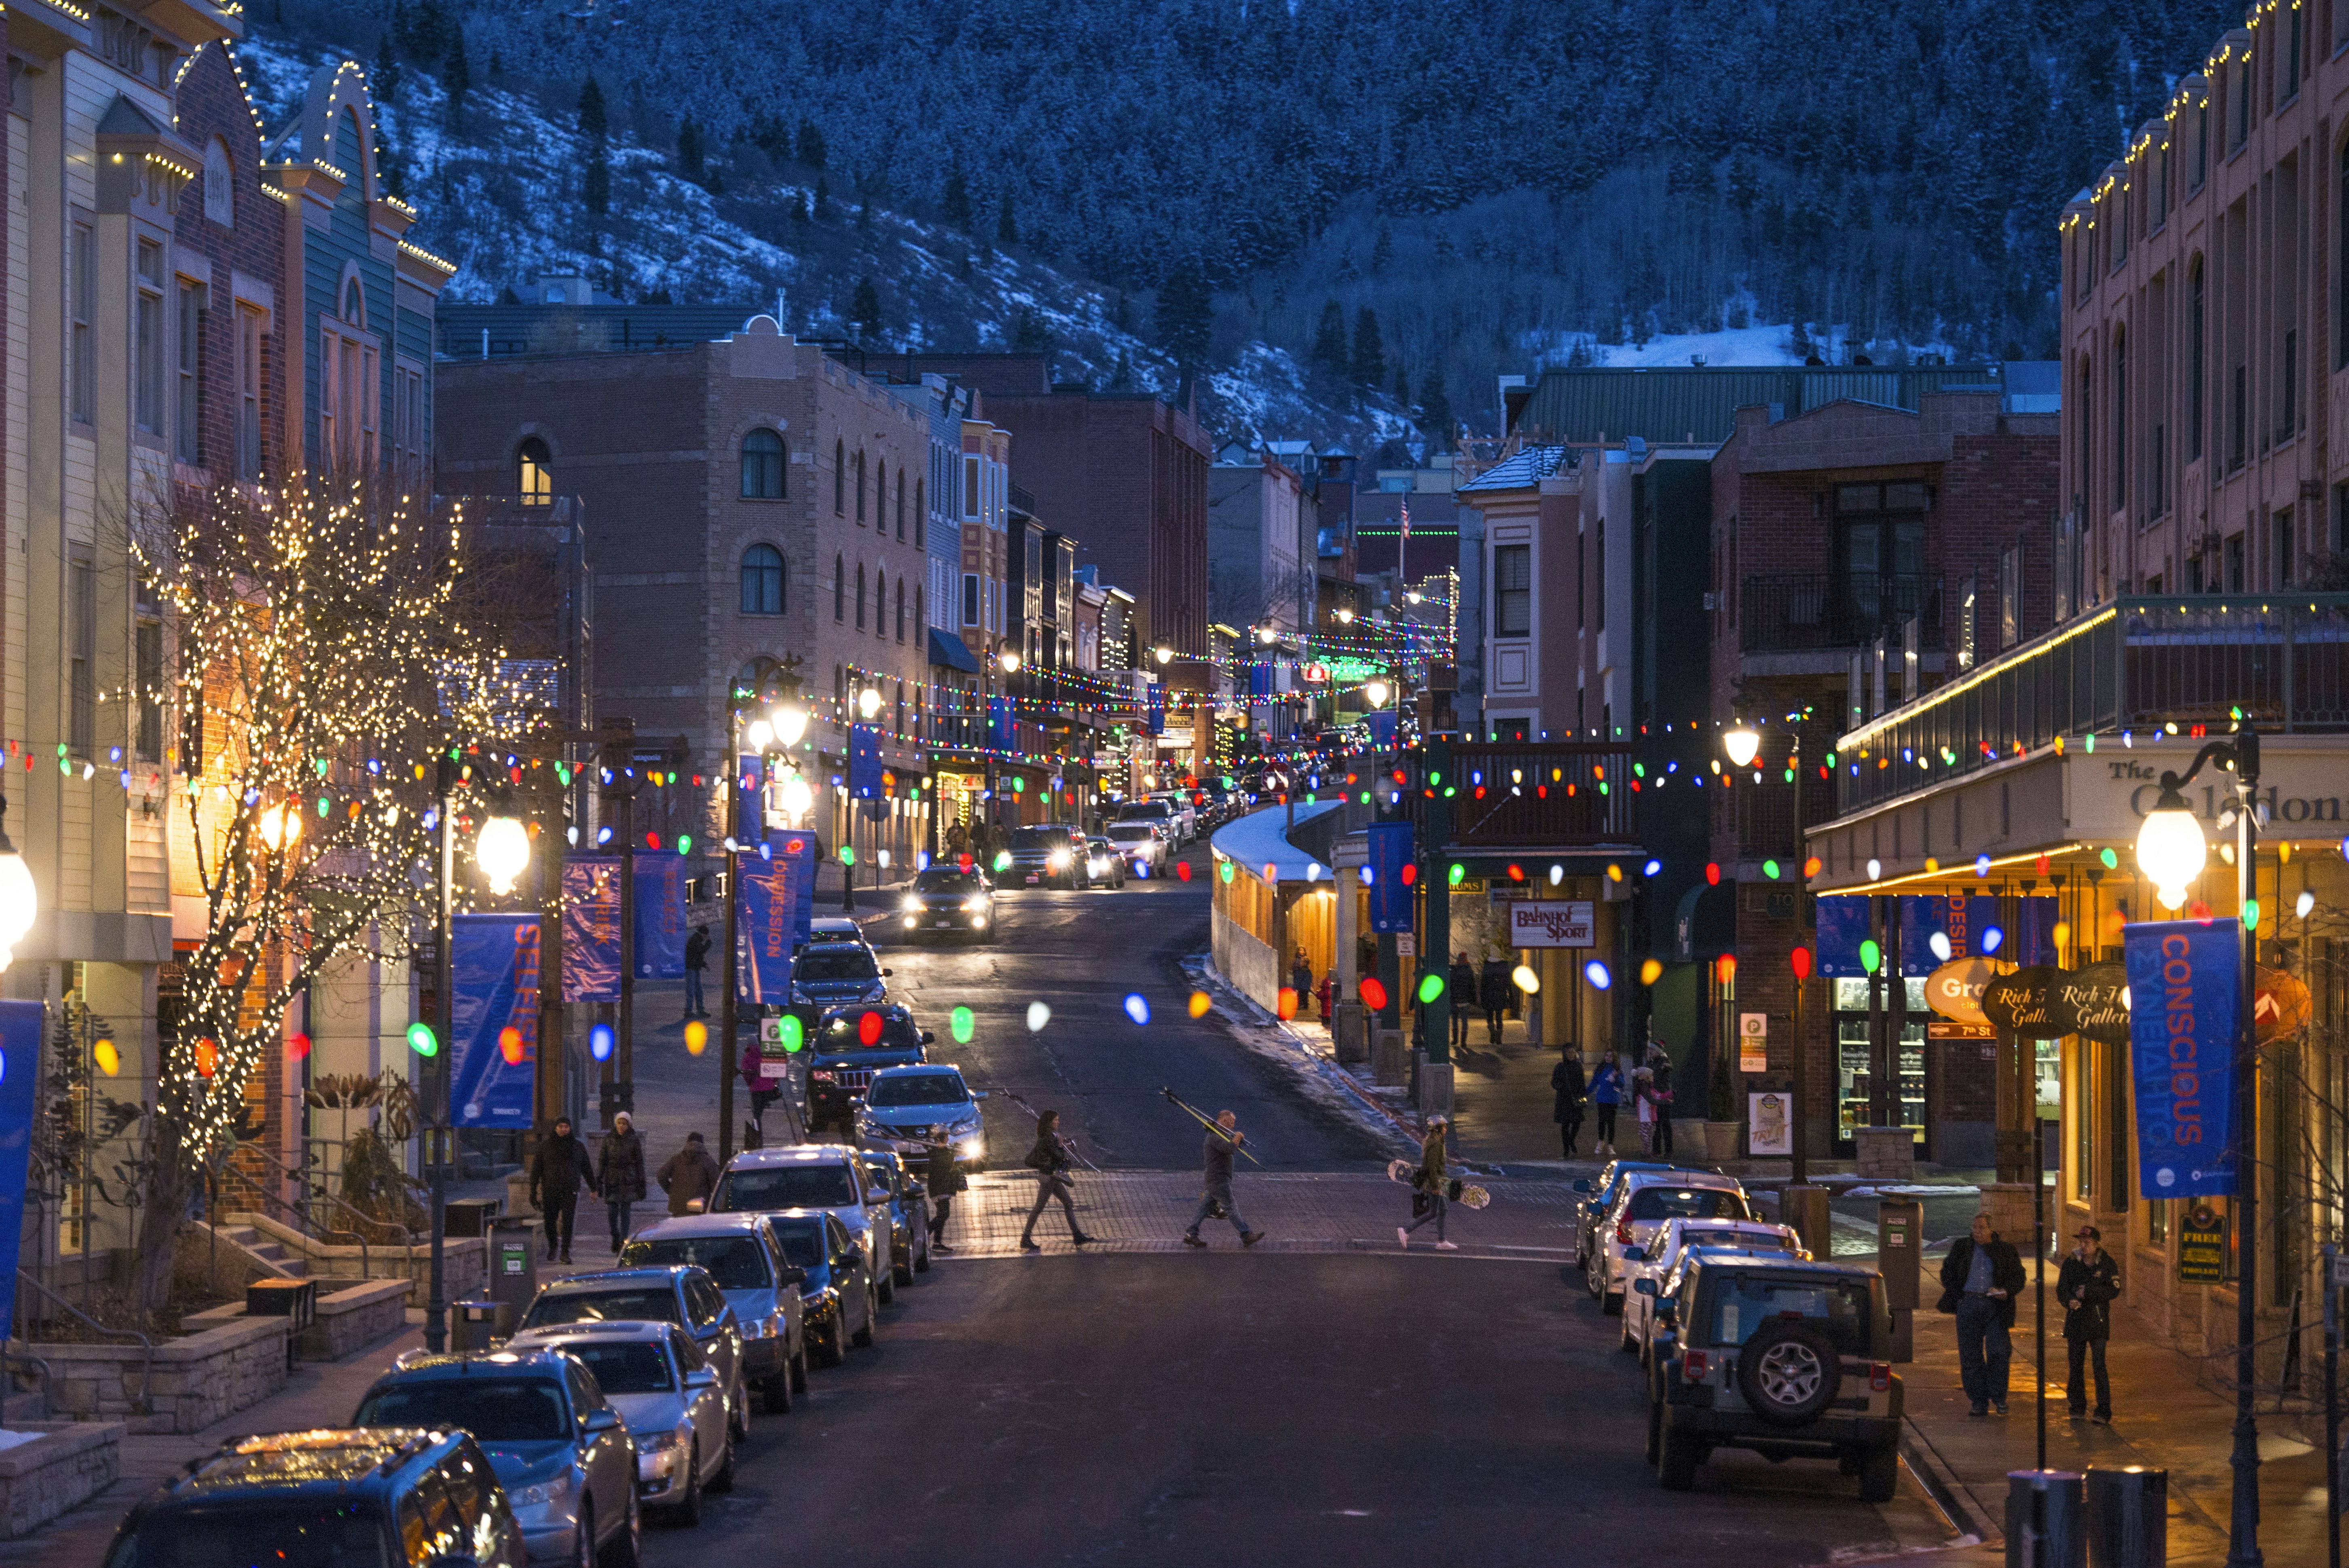 A group of people walk across a cobble-stoned street holding ski gear during the evening in a brightly lit downtown Park City. There are a pair of people each walking downhill on opposite sides of the street; bachelorette party